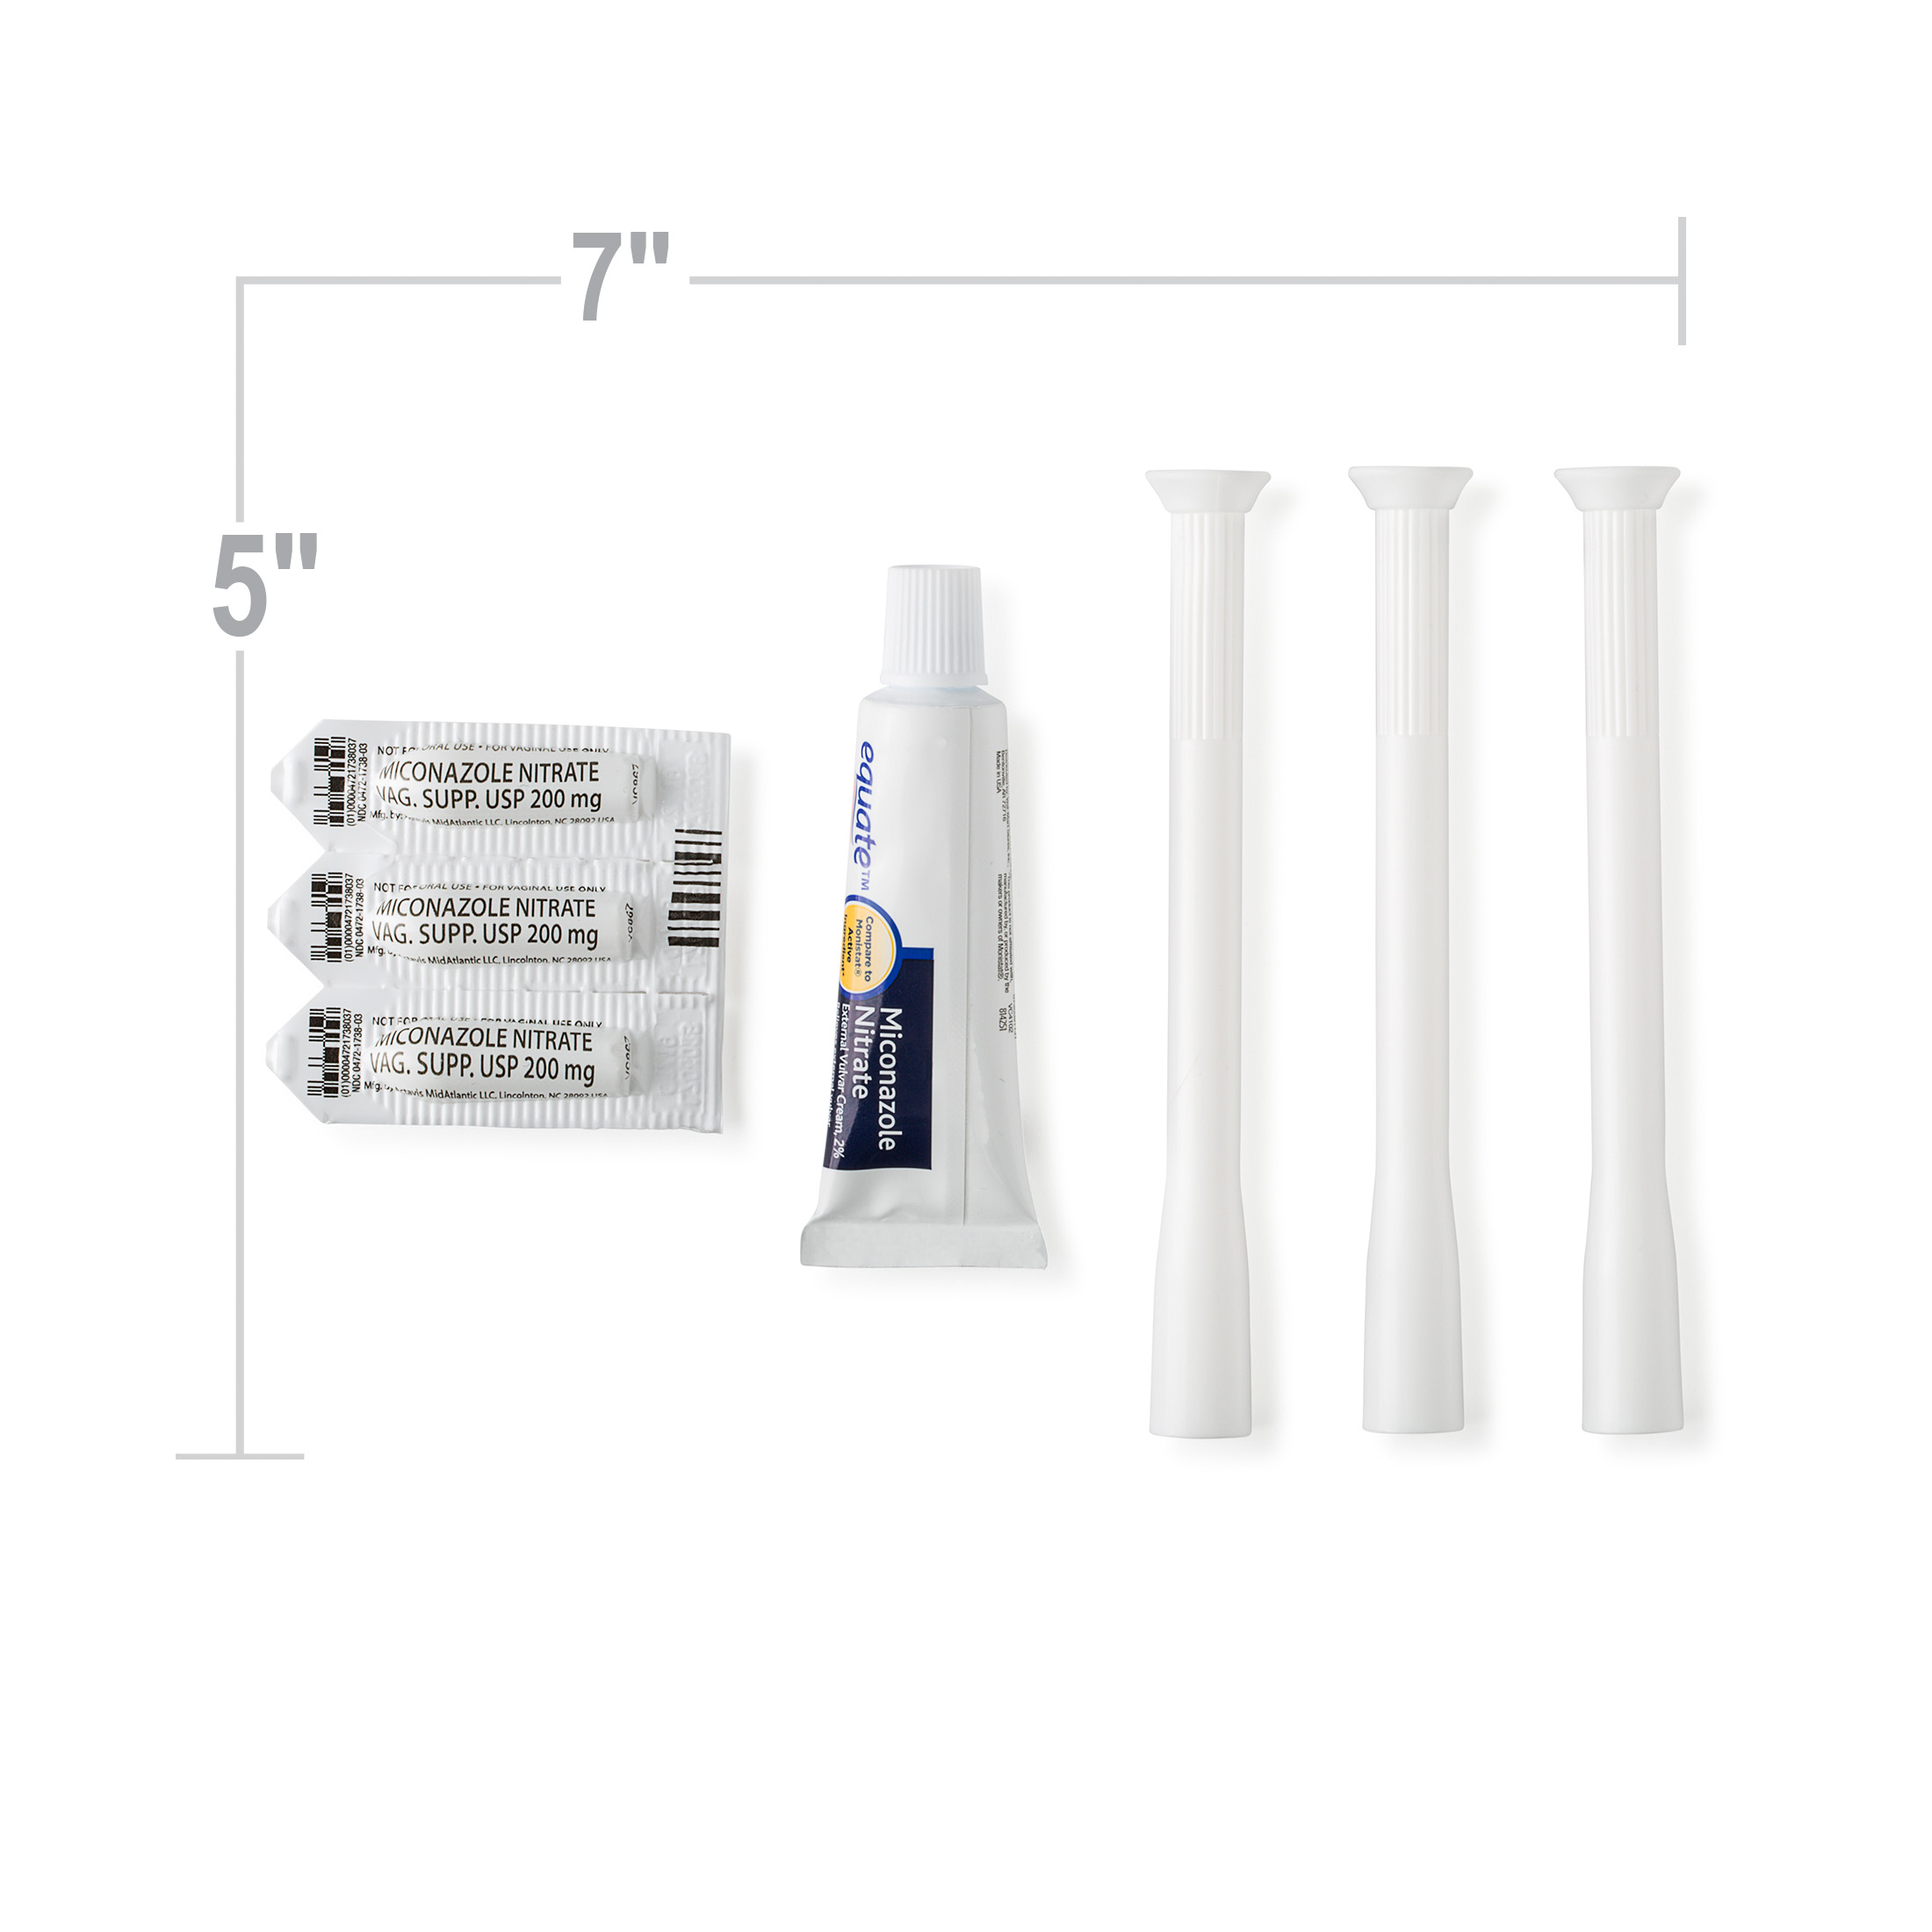 Equate Miconazole 3-Day Vaginal Cream Treatment, 2% External Vulvar Cream And 200 Mg Suppositories With Disposable Applicators - image 5 of 7